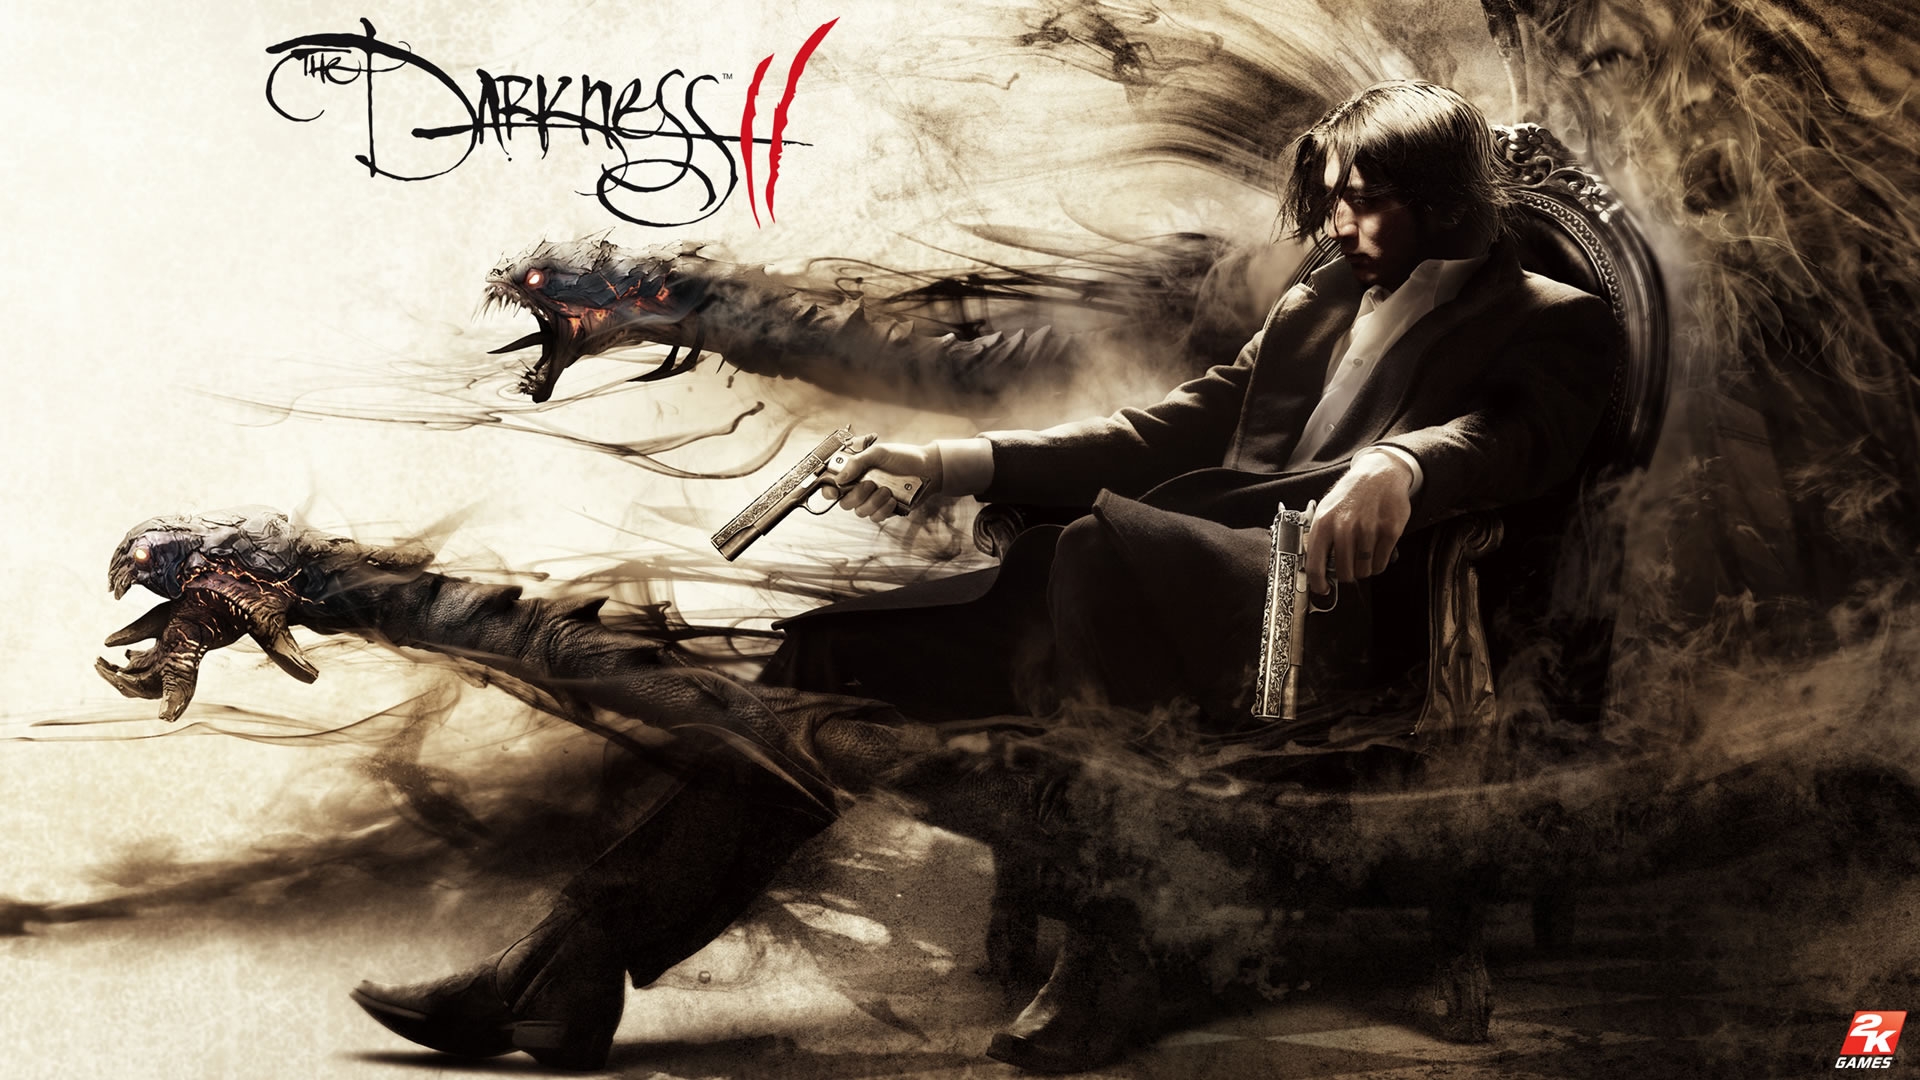 The Darkness II for 1920 x 1080 HDTV 1080p resolution